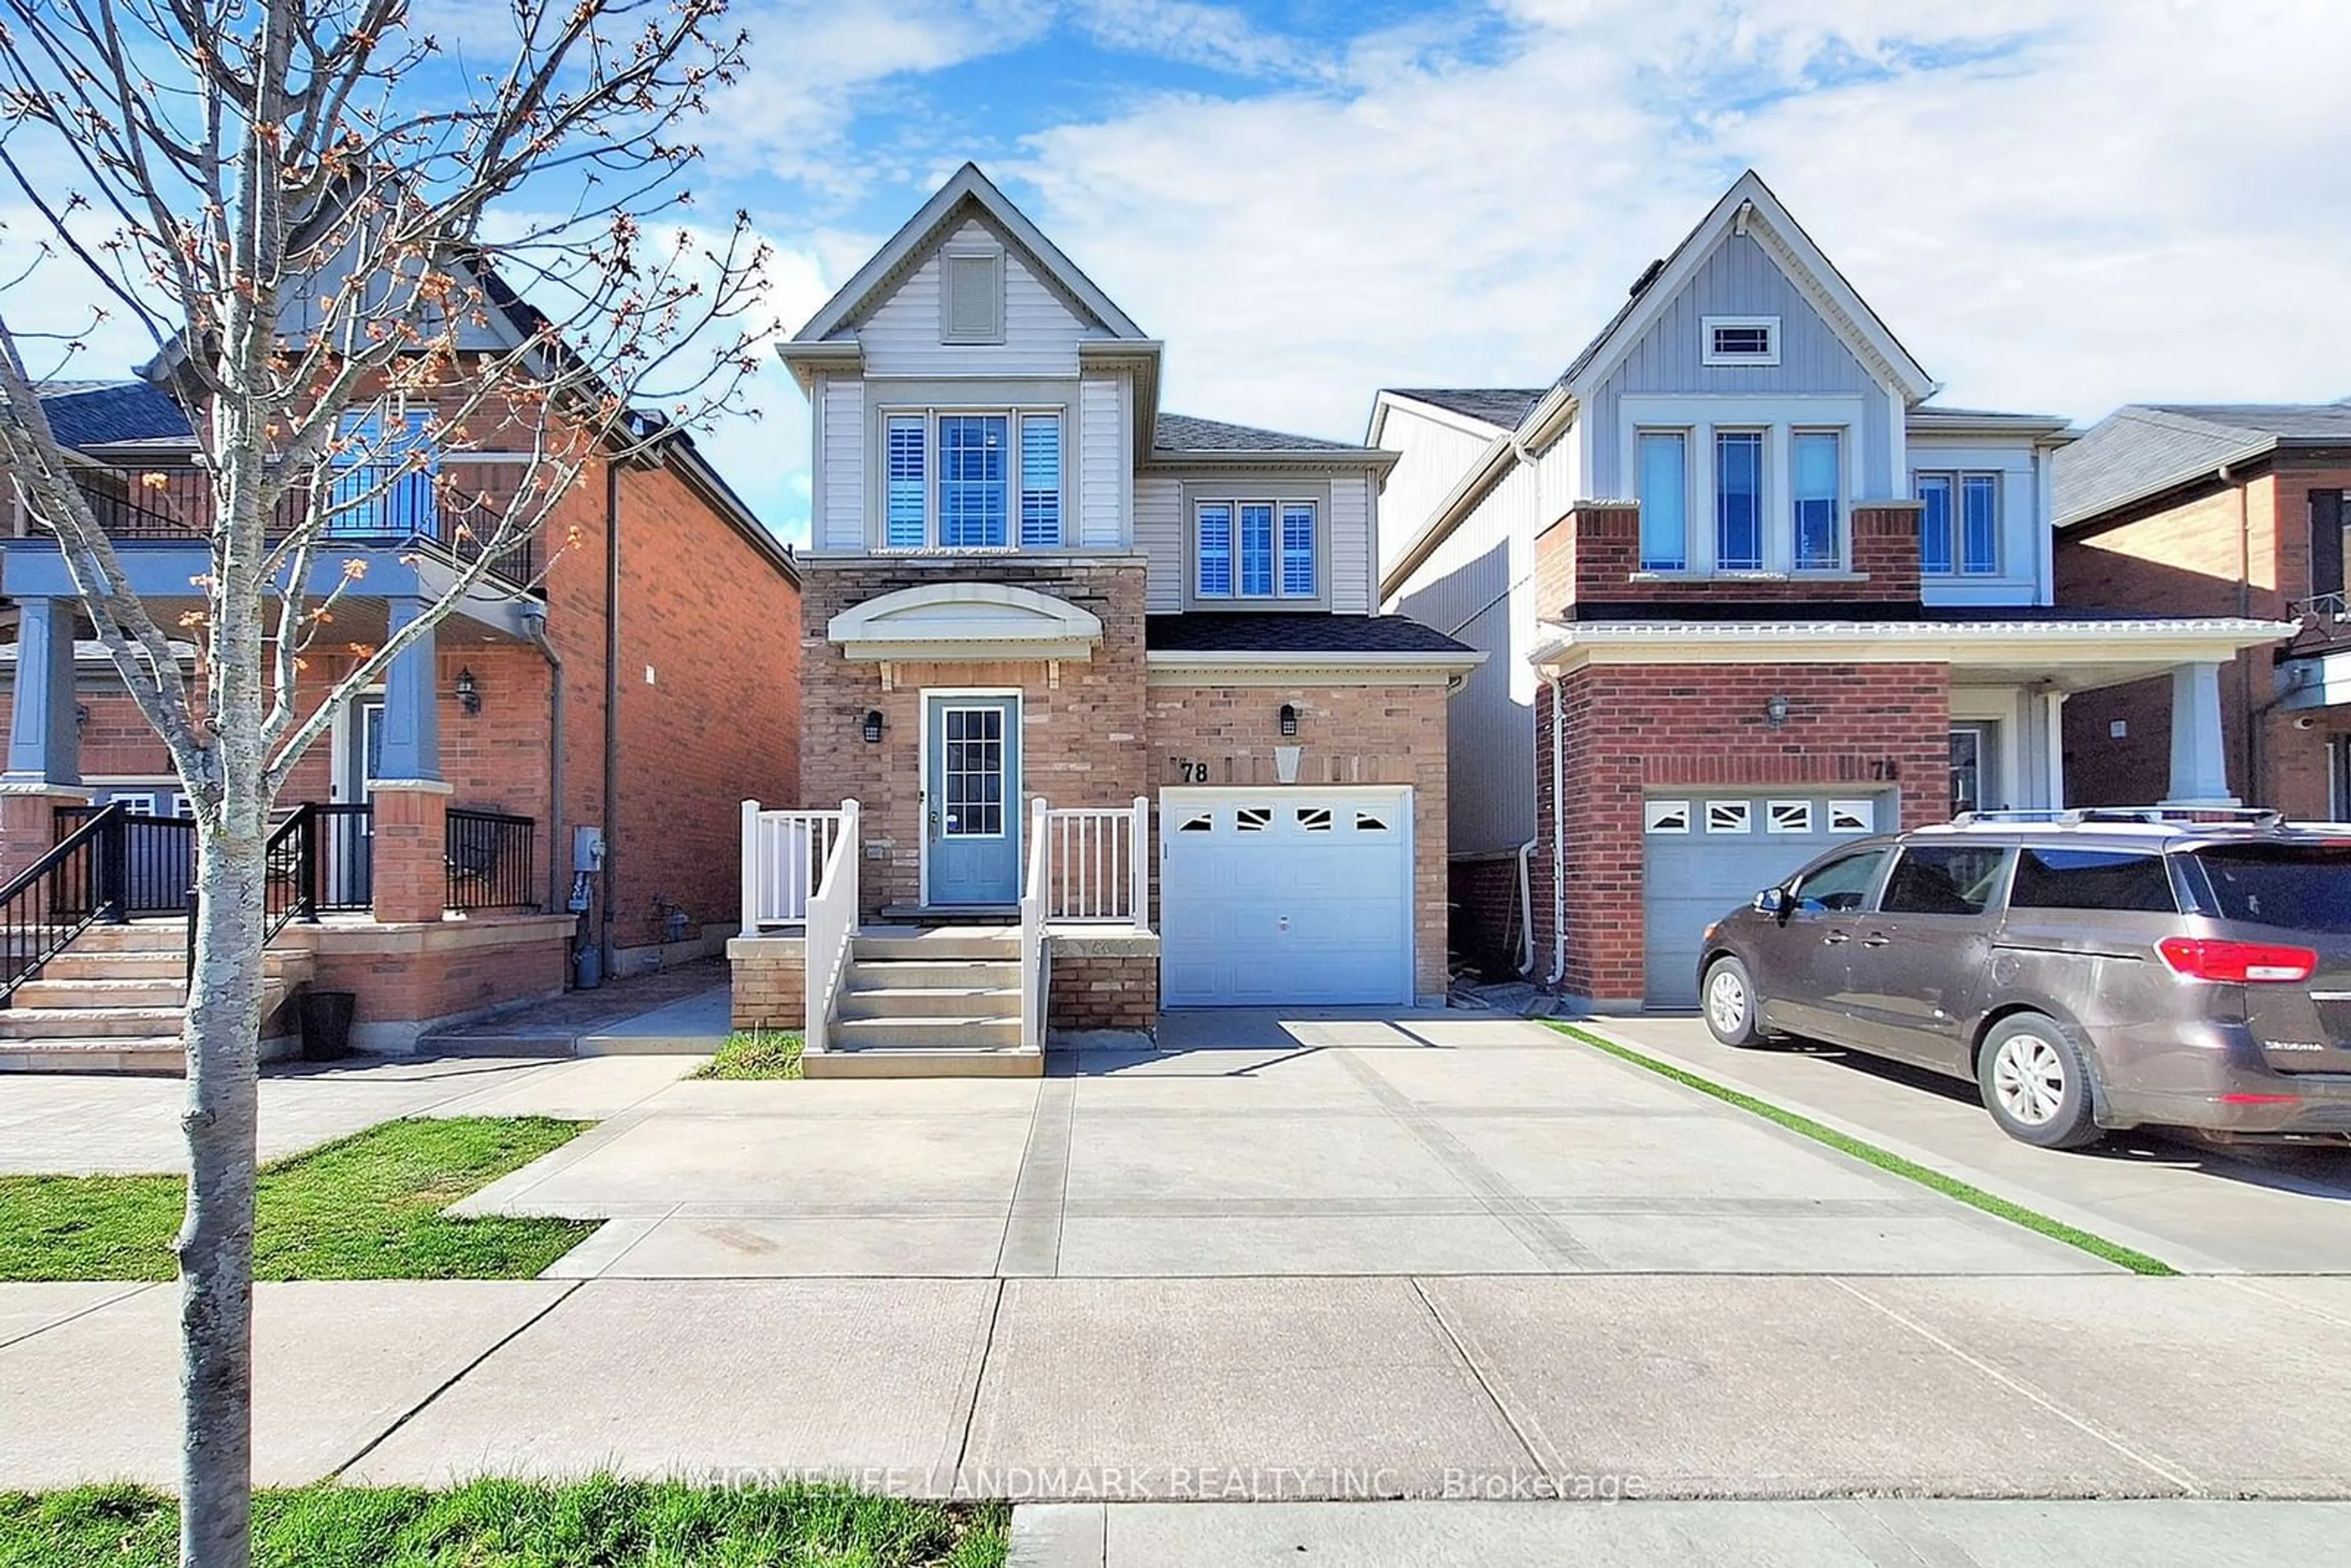 Home with brick exterior material for 78 Orr Dr, Bradford West Gwillimbury Ontario L3Z 0L9